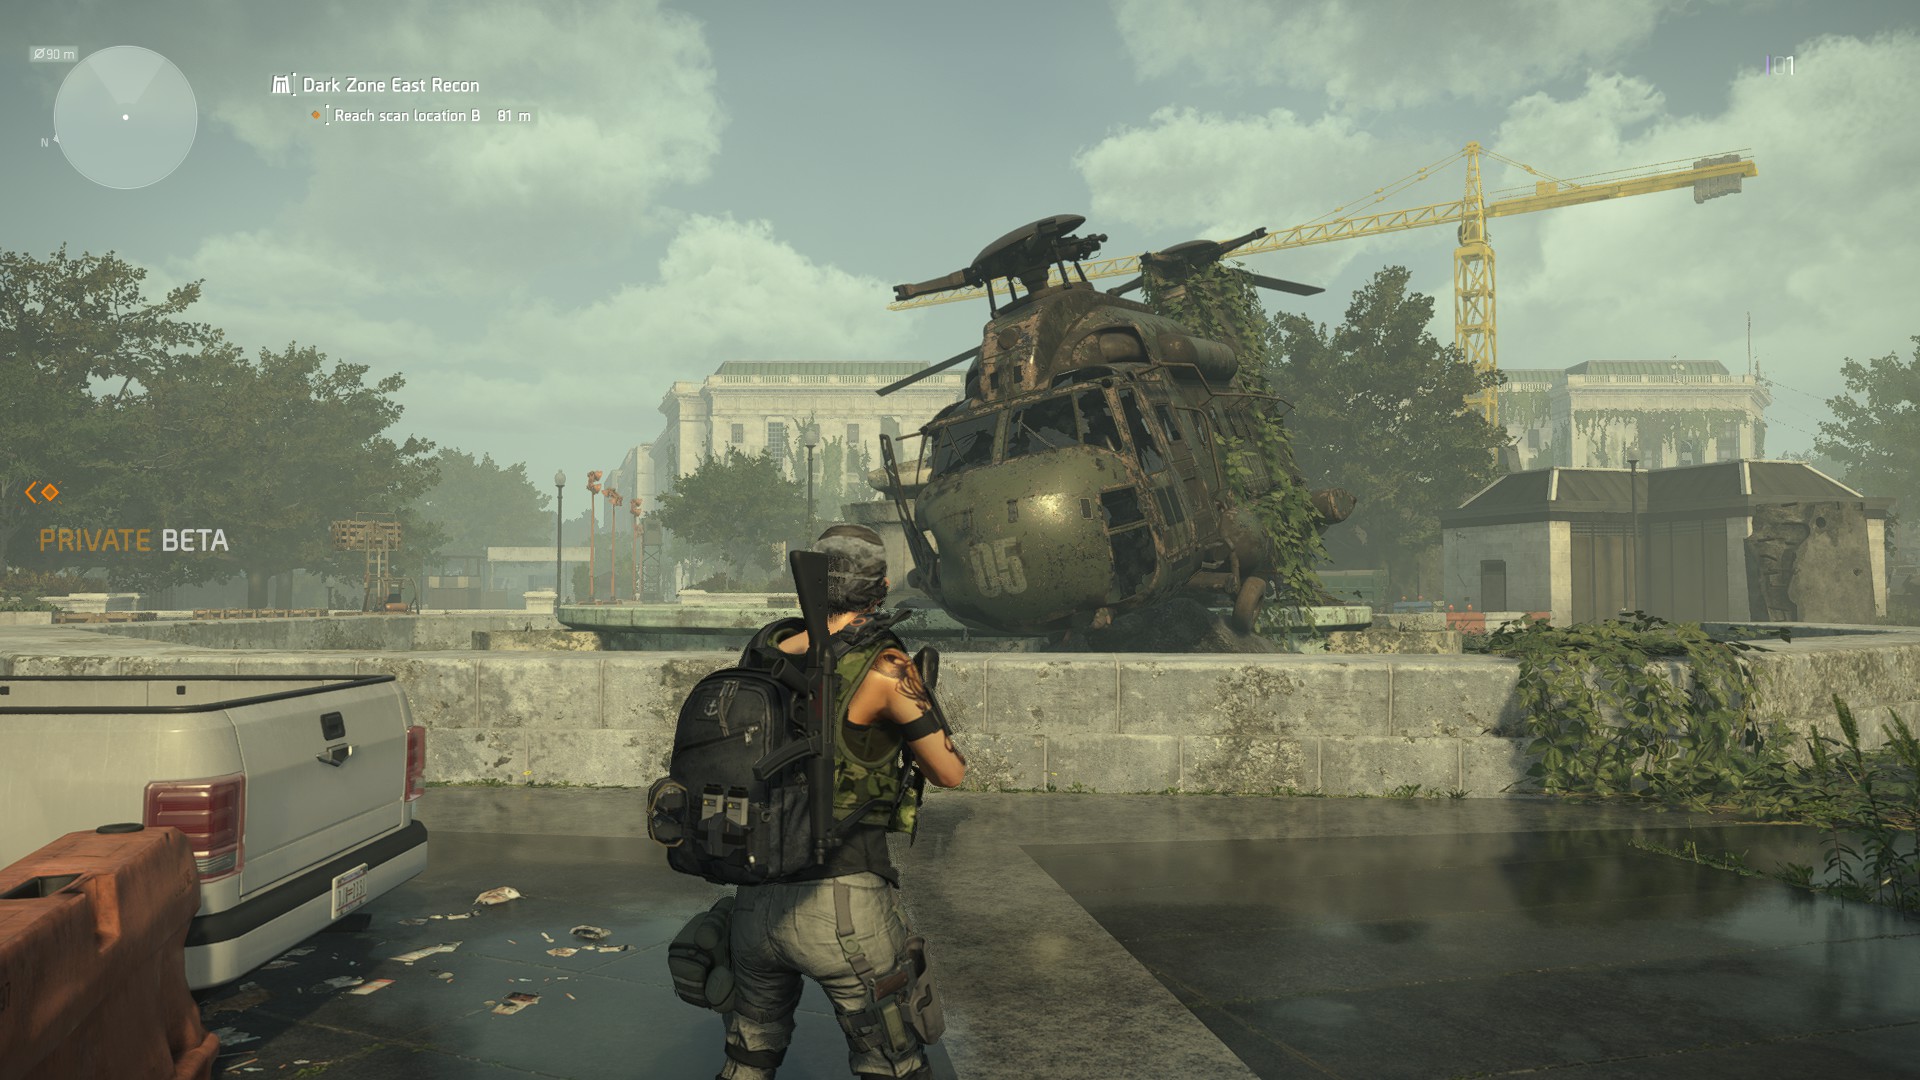 The Division 2 Gear Score crafting mods